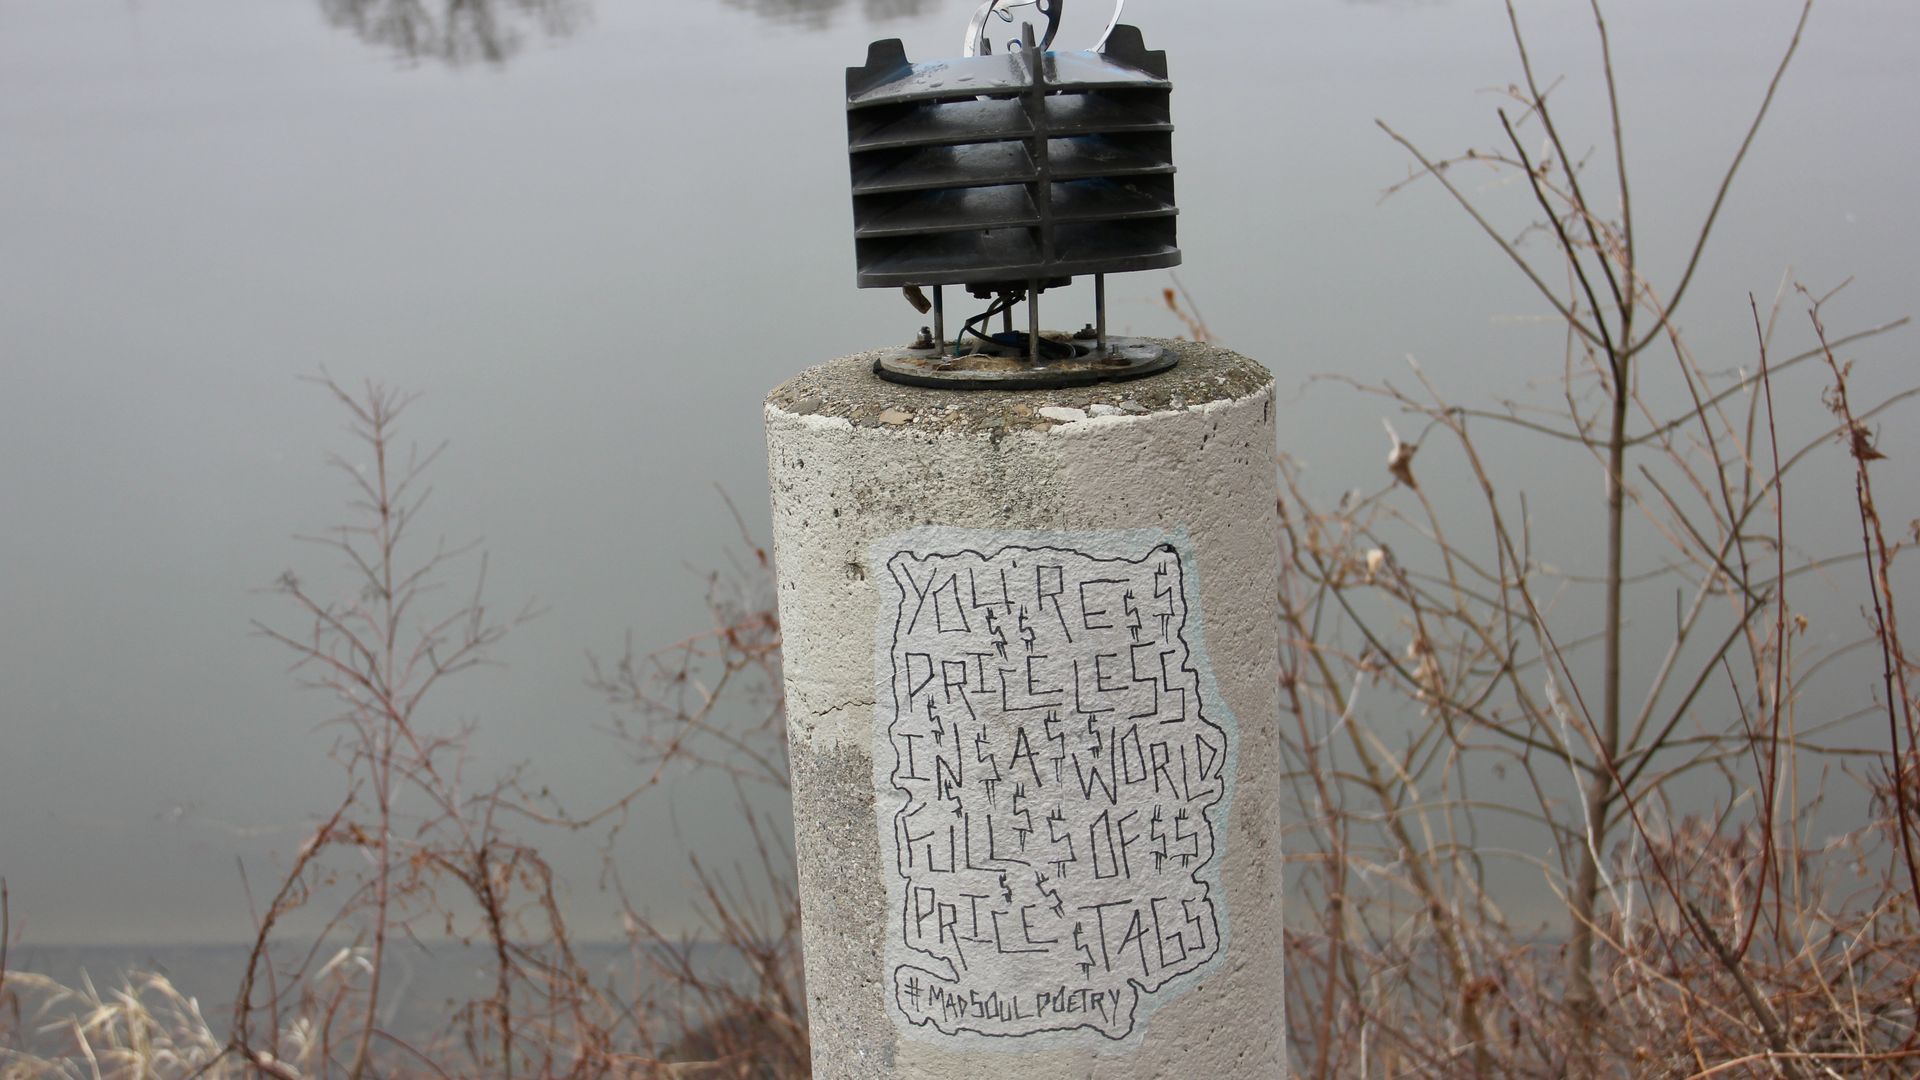 A broken light post saying, "You're priceless in a world full of price tags."